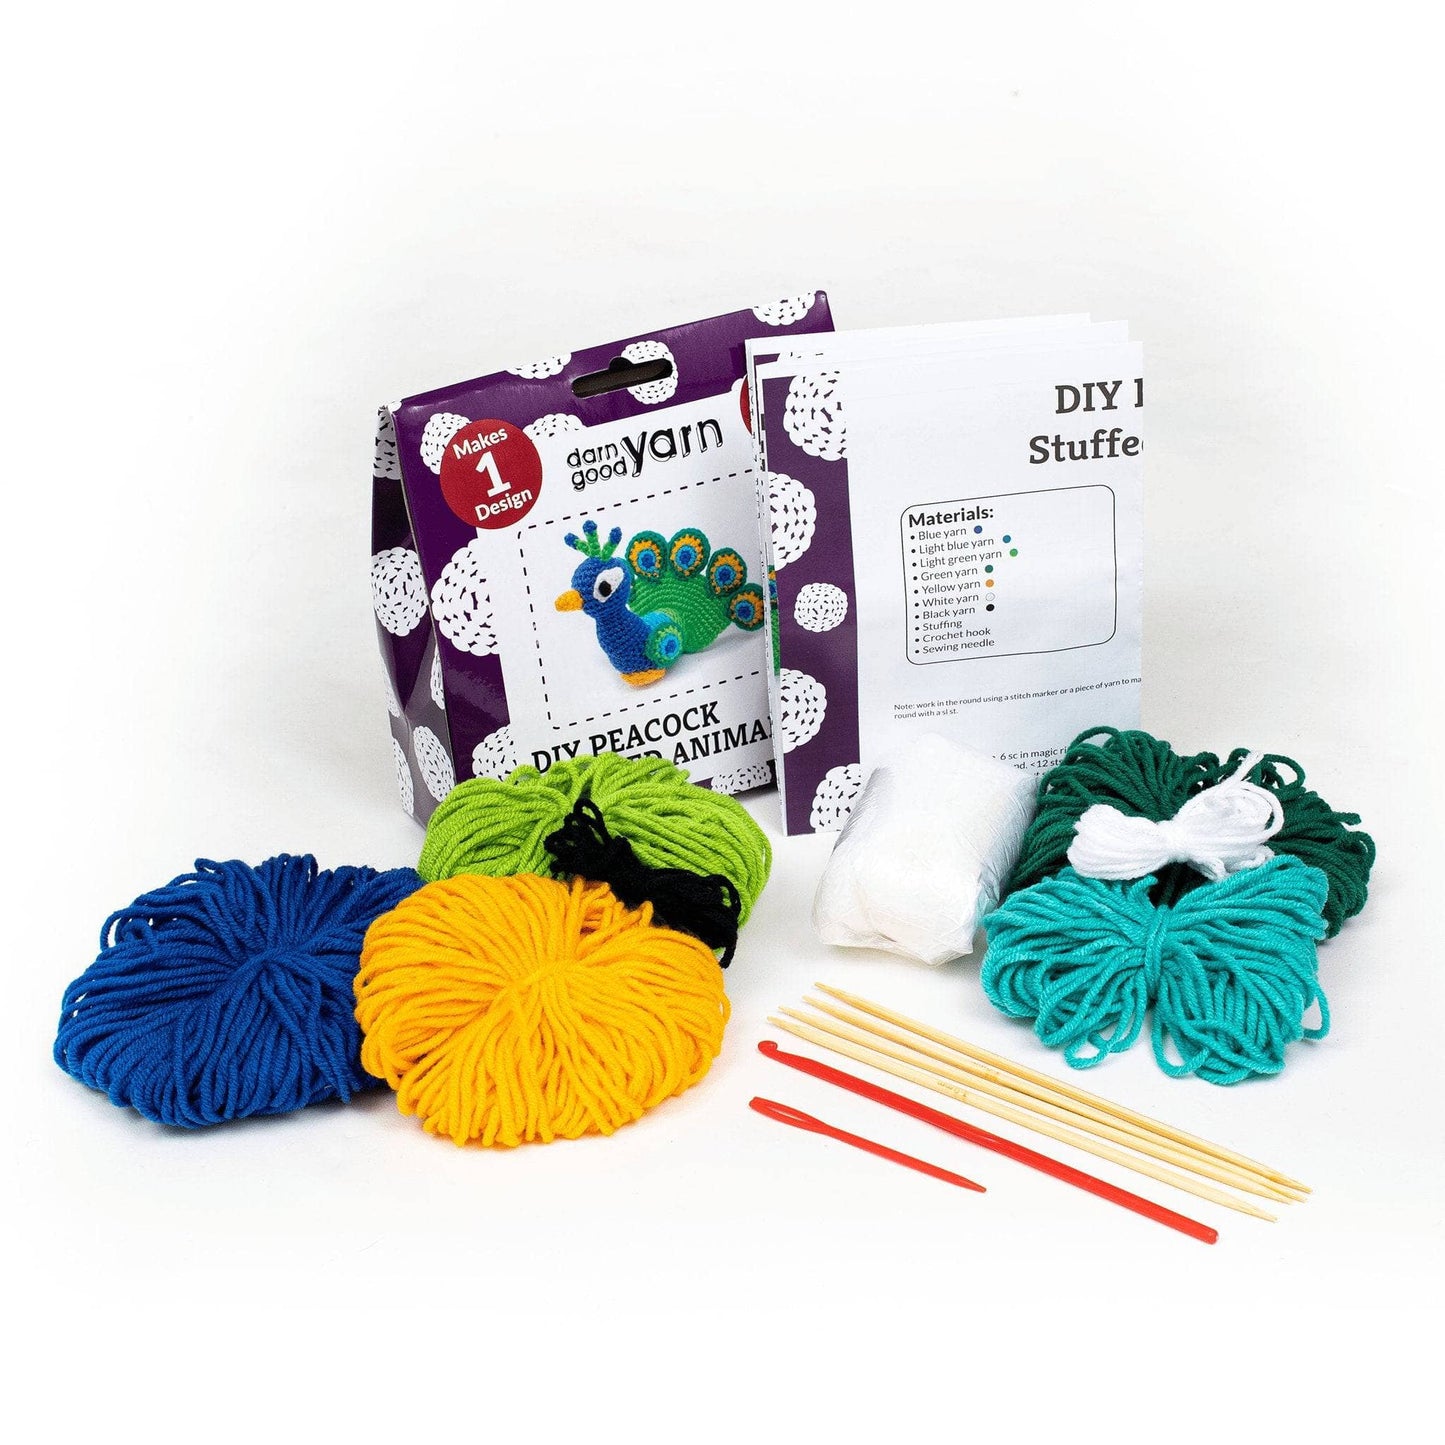 purple and white cardboard box with all contents visible in front of a white background. Yarn, needle, hook, knitting needles, stuffing, and instruction booklet.